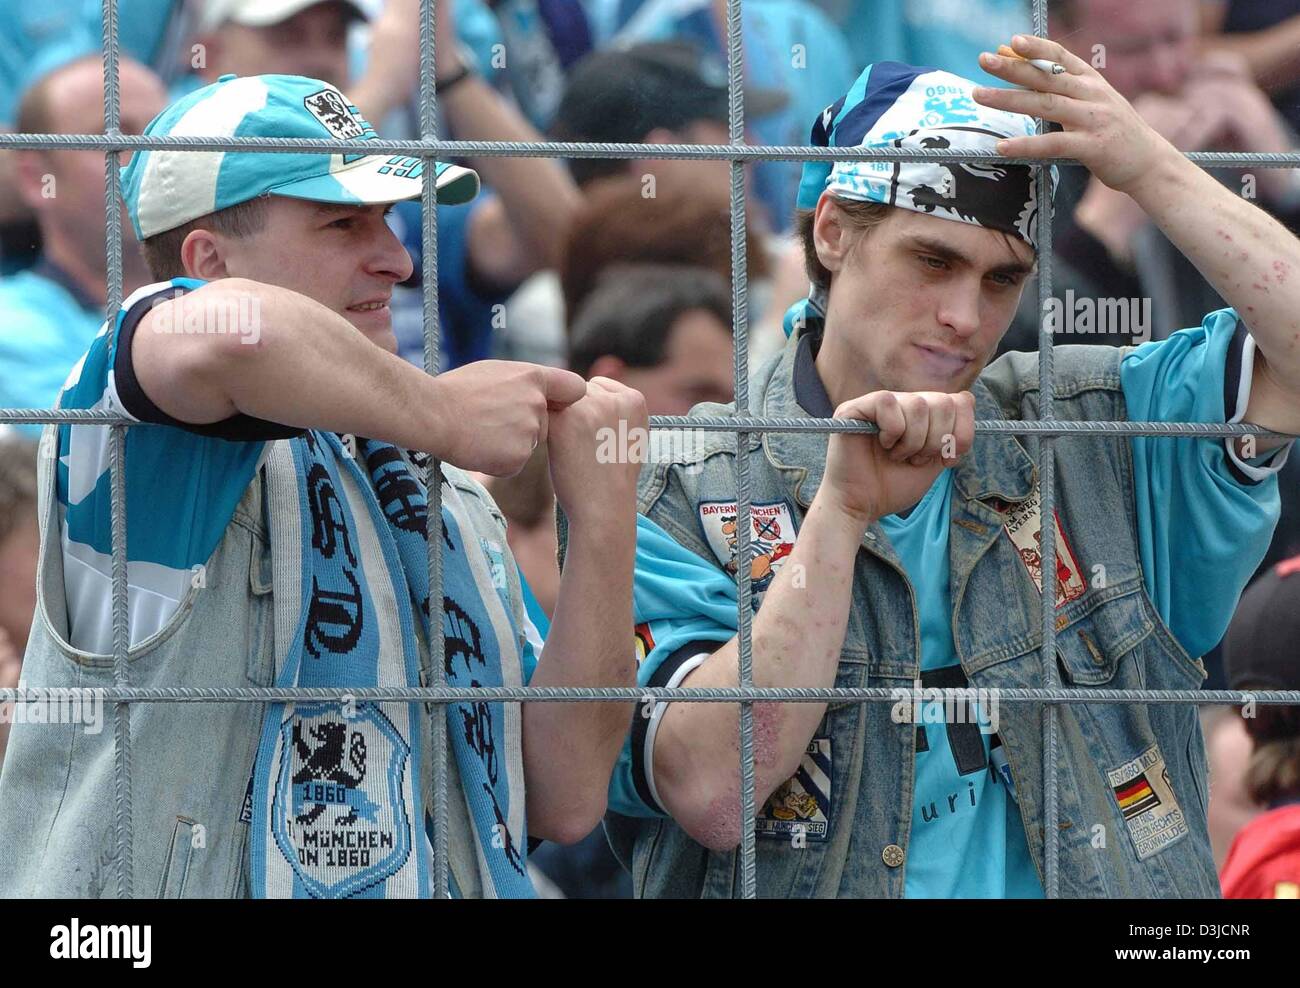 (dpa) - Fans of soccer club TSV 1860 Munich look extremely depressed after their team's 3-4 defeat against LR Ahlen in the Second Bundesliga match at the Gruenwalder stadium in Munich, Germany, 22 May 2005. Munich failed to qualify for Germany's top soccer division. Stock Photo